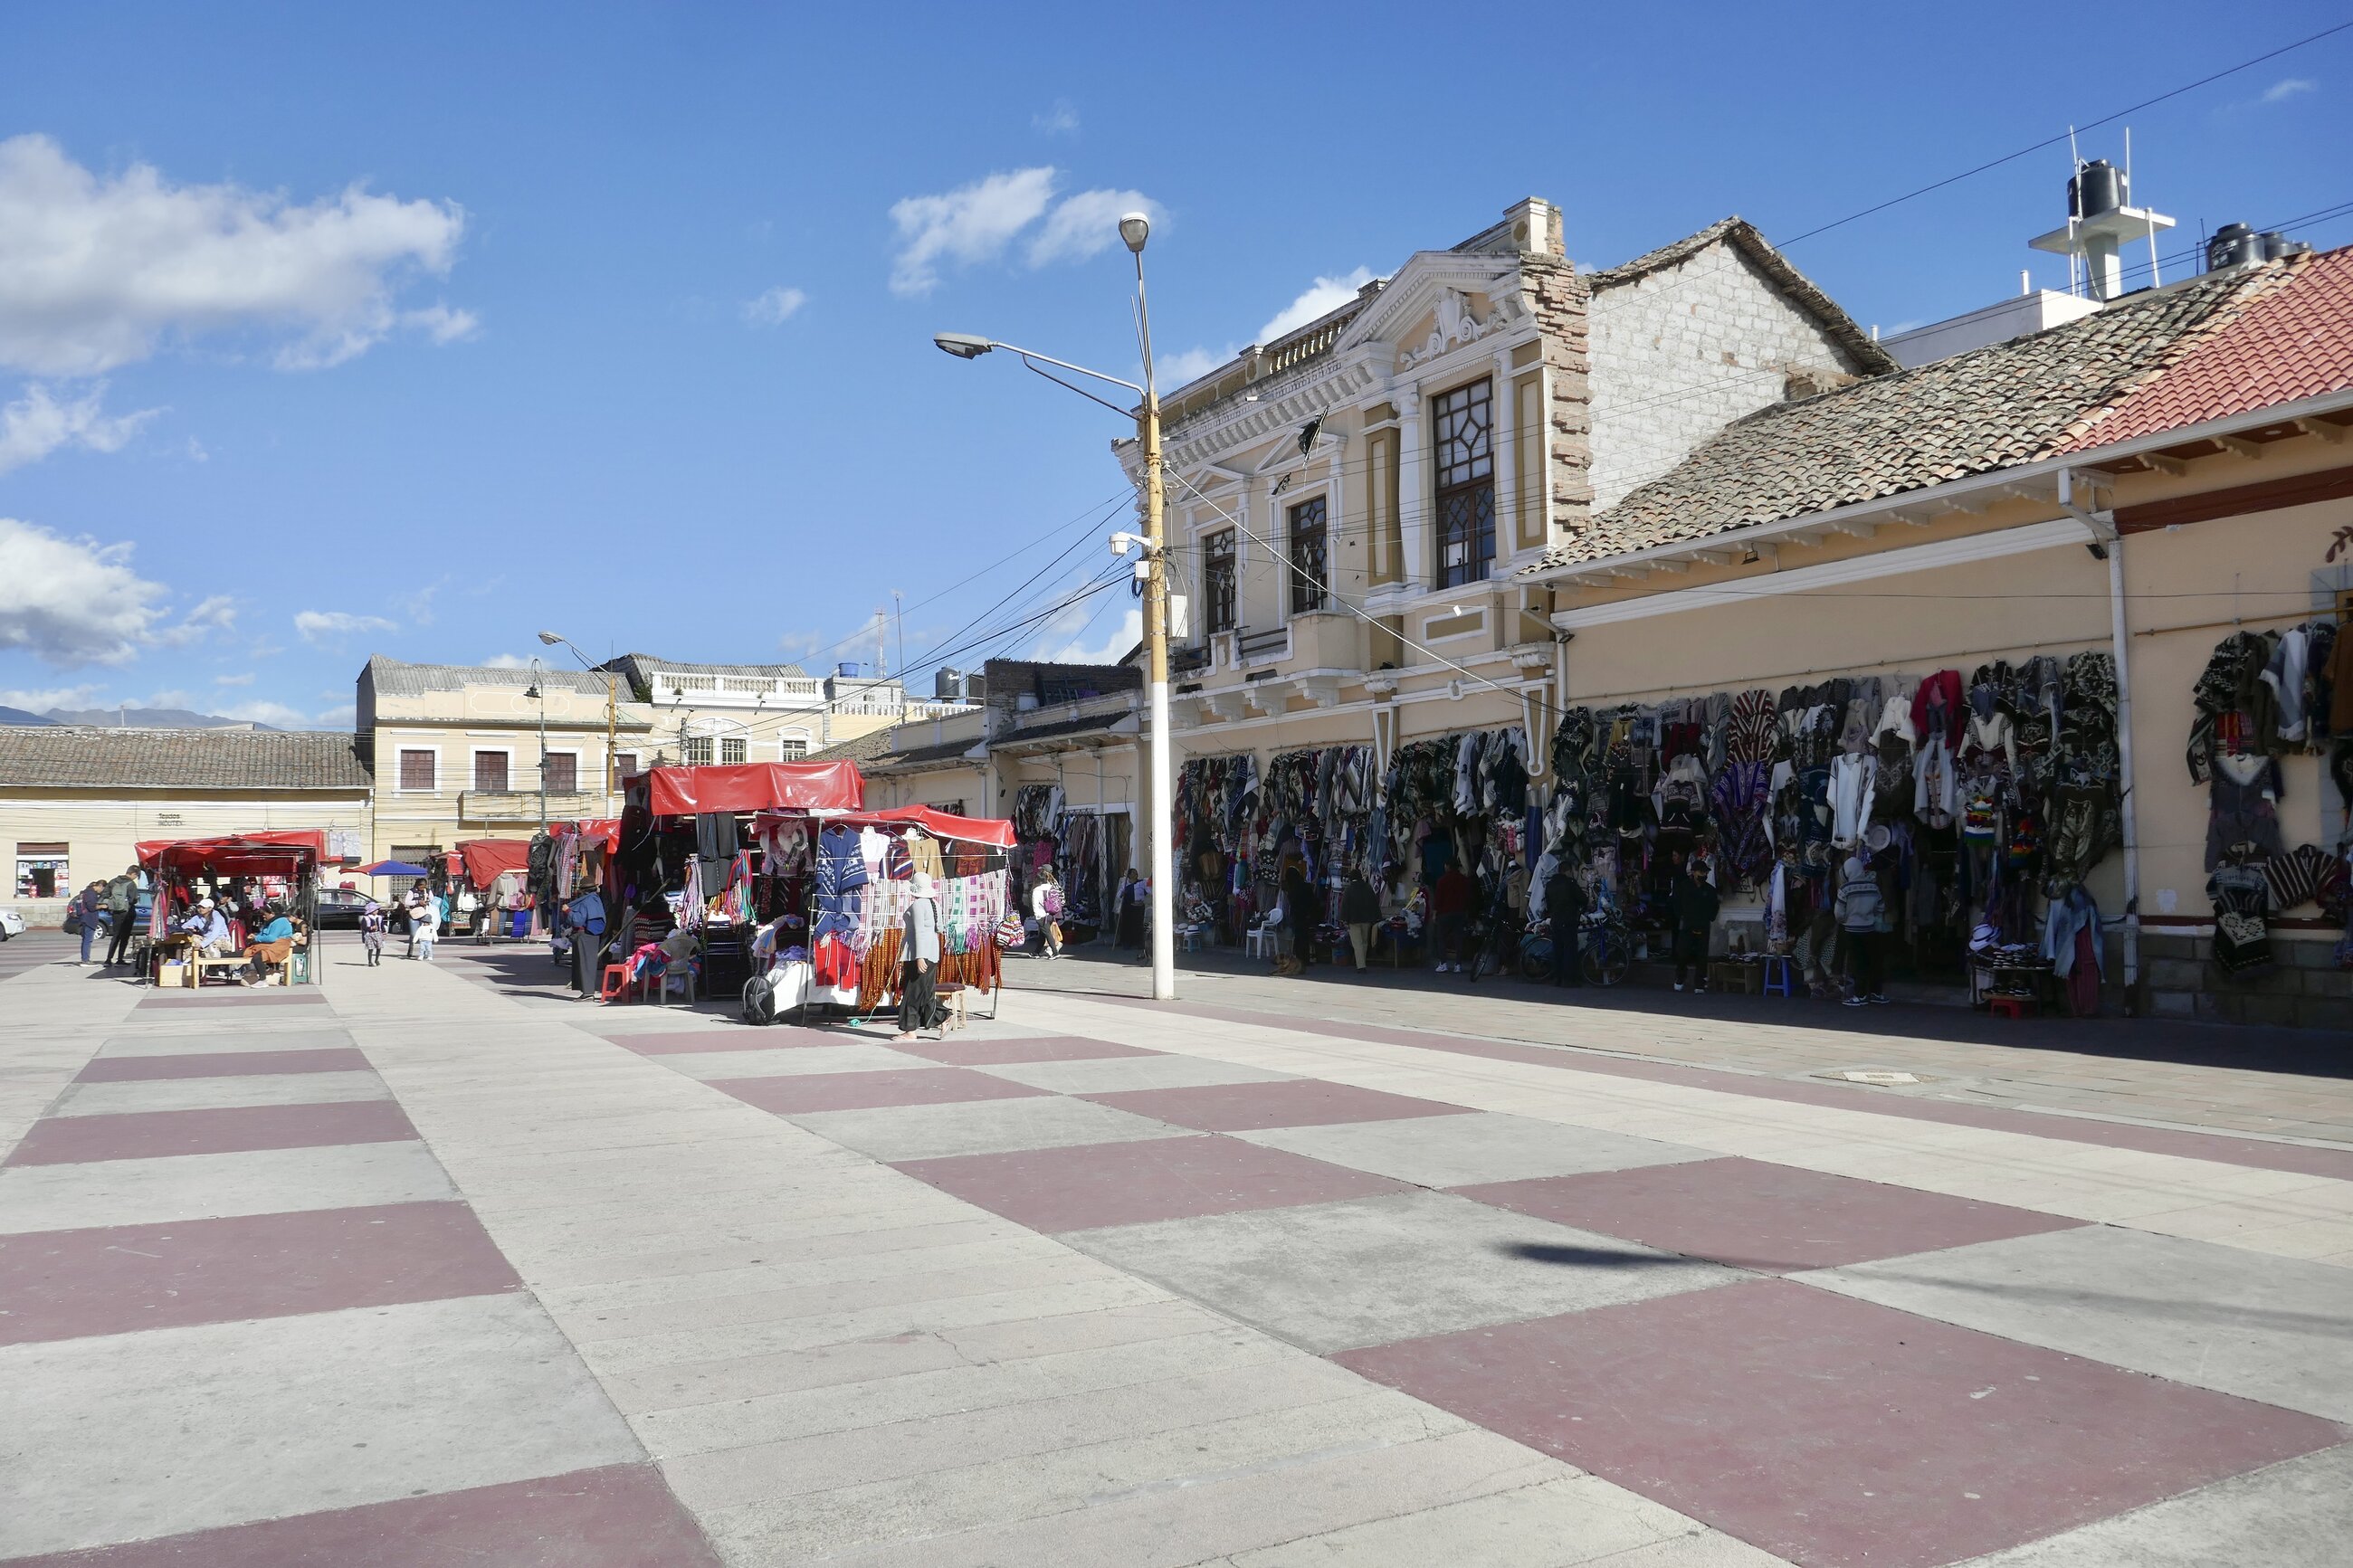 A Poncho Market In The City